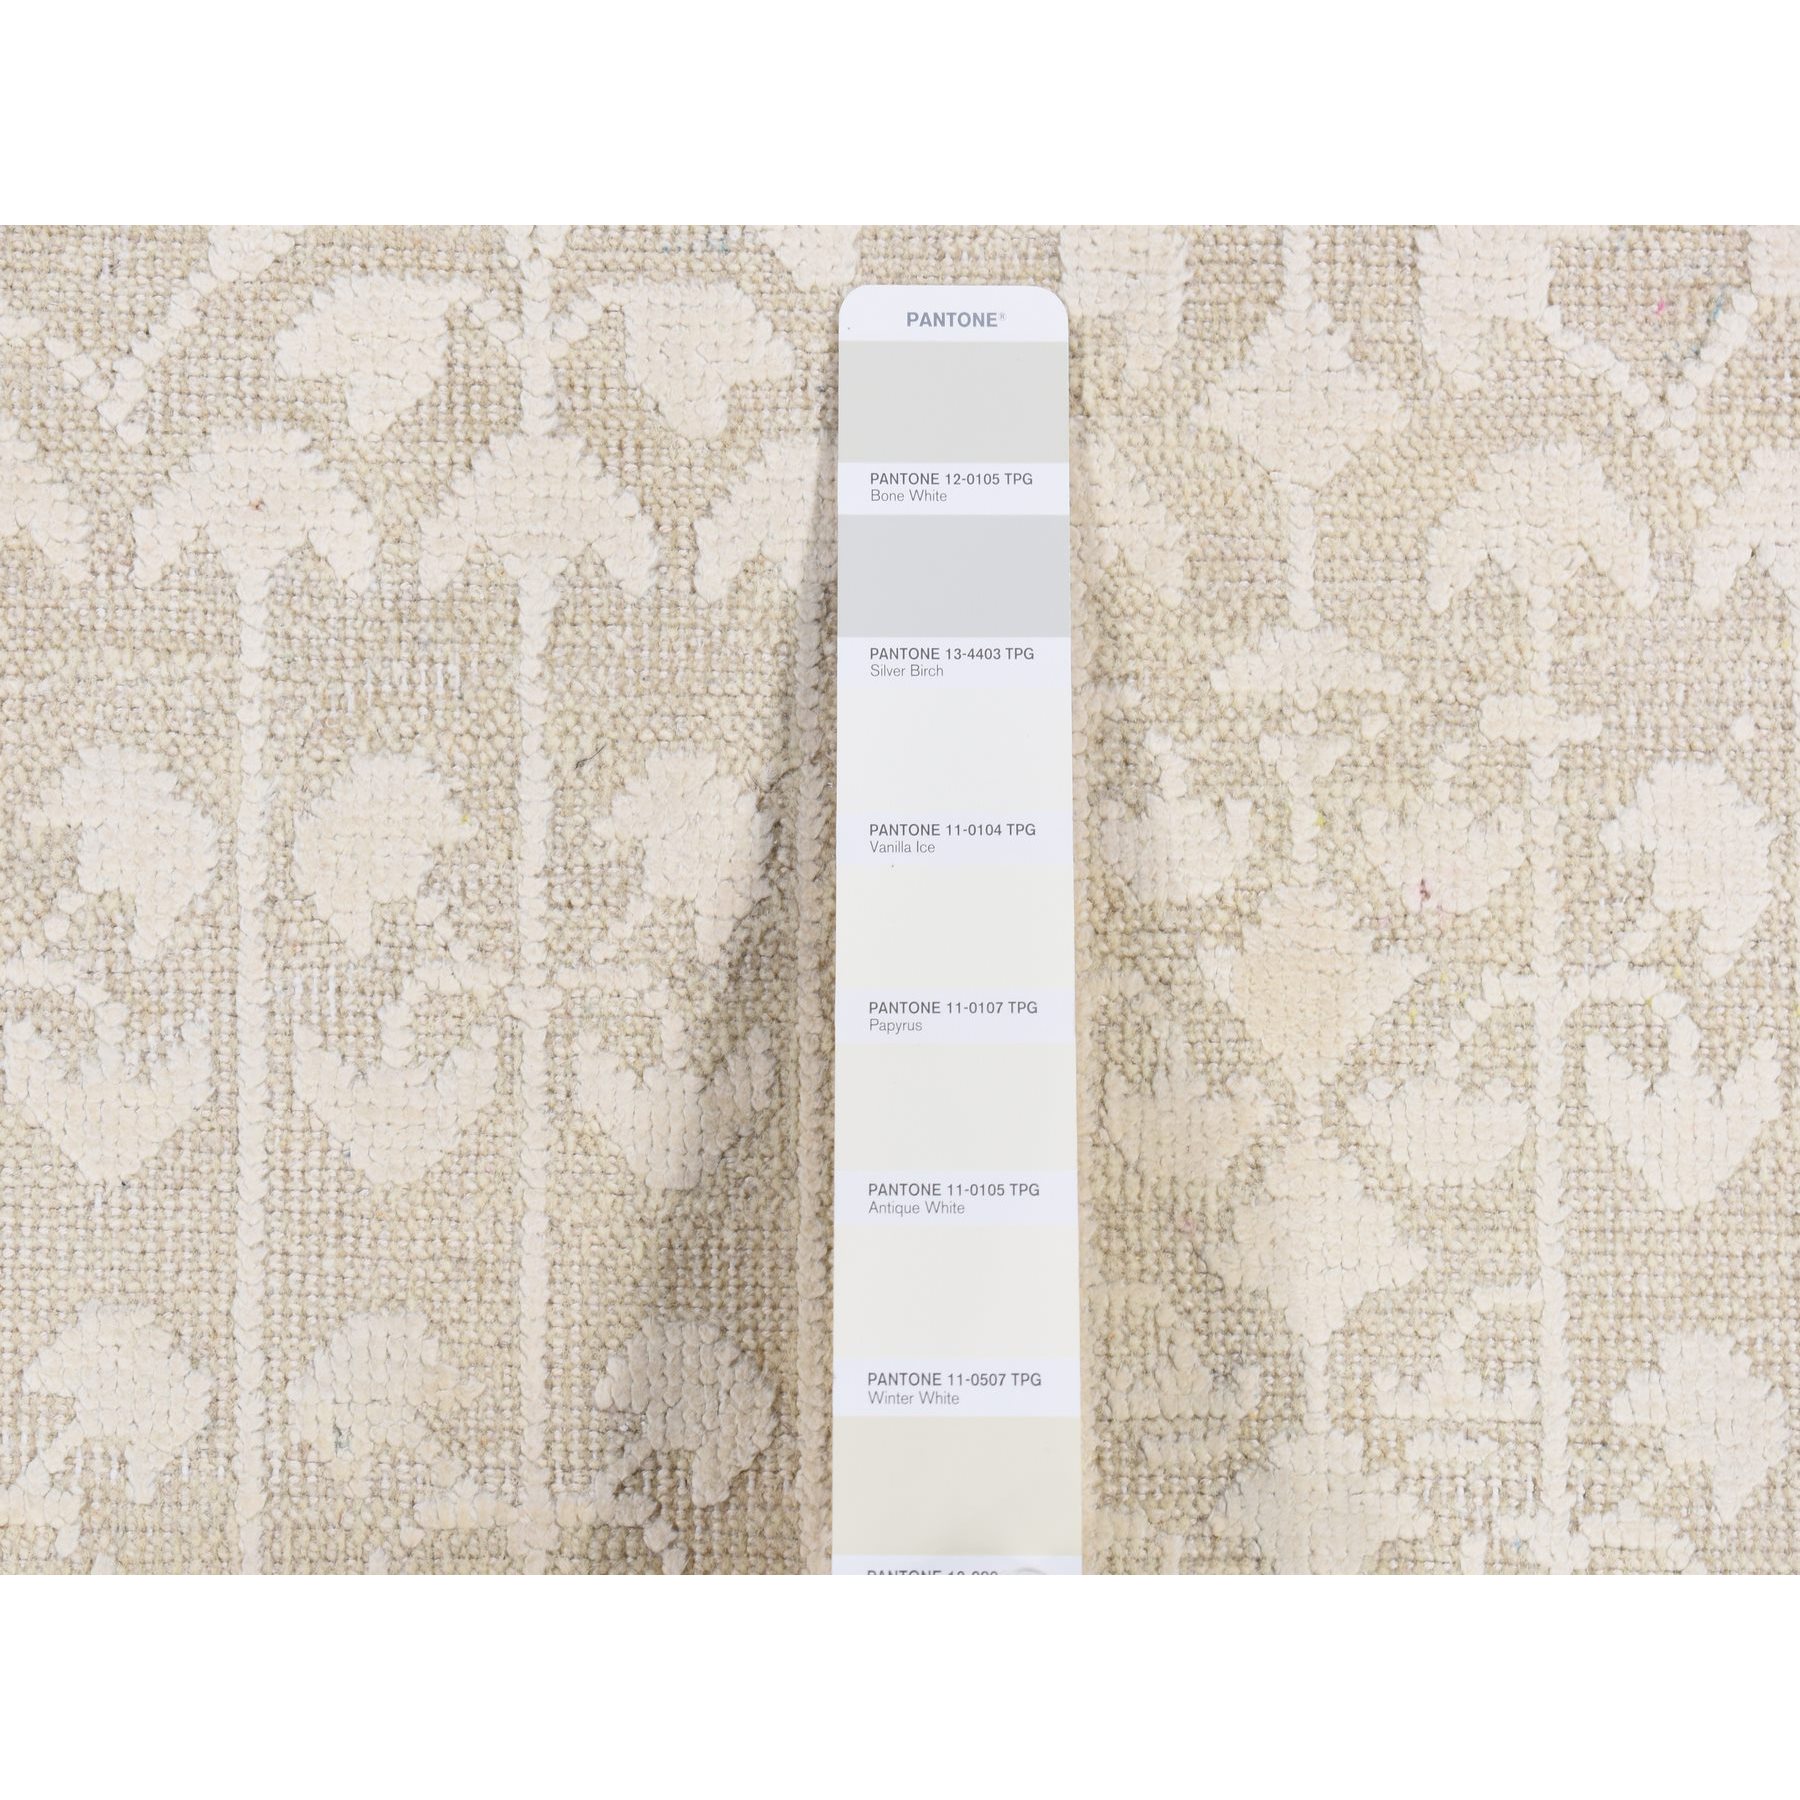 2'6"x11'8" Ivory, Hand Woven, Tone on Tone, Pure Silk with Textured Wool, Runner Oriental Rug 